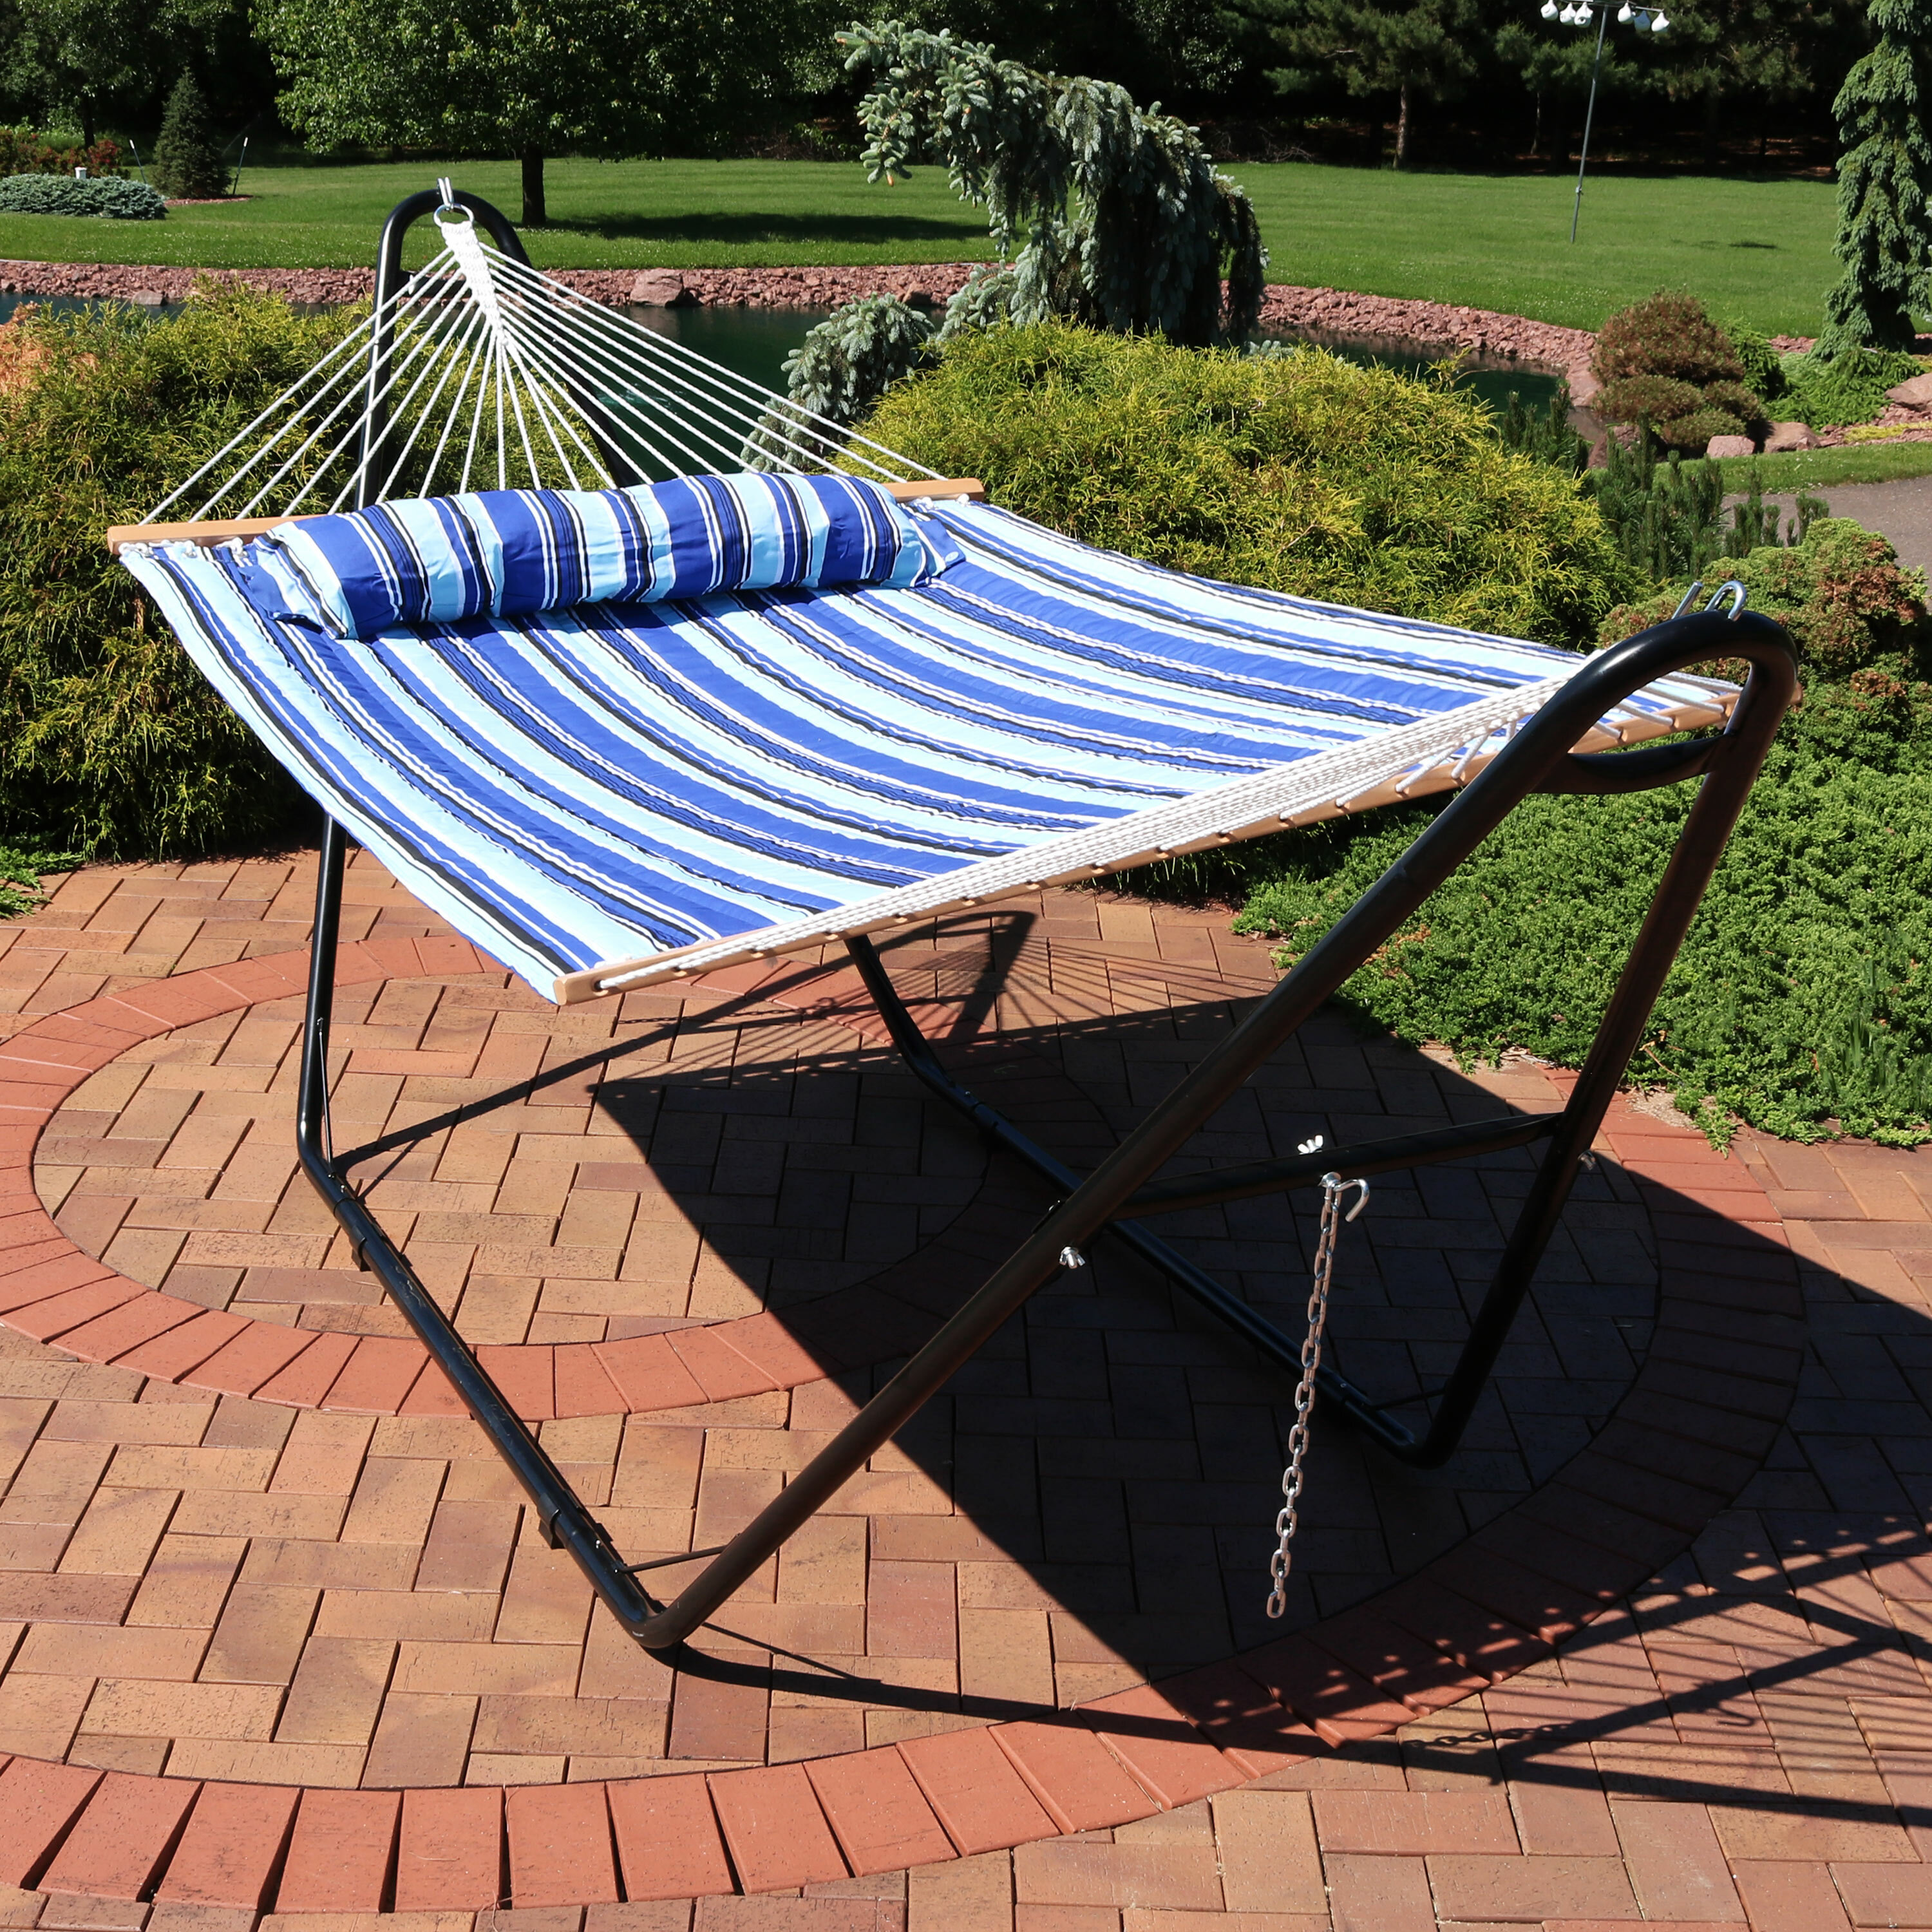 Arlmont Co Harrington Quilted Double Spreader Bar Hammock With Stand Reviews Wayfair